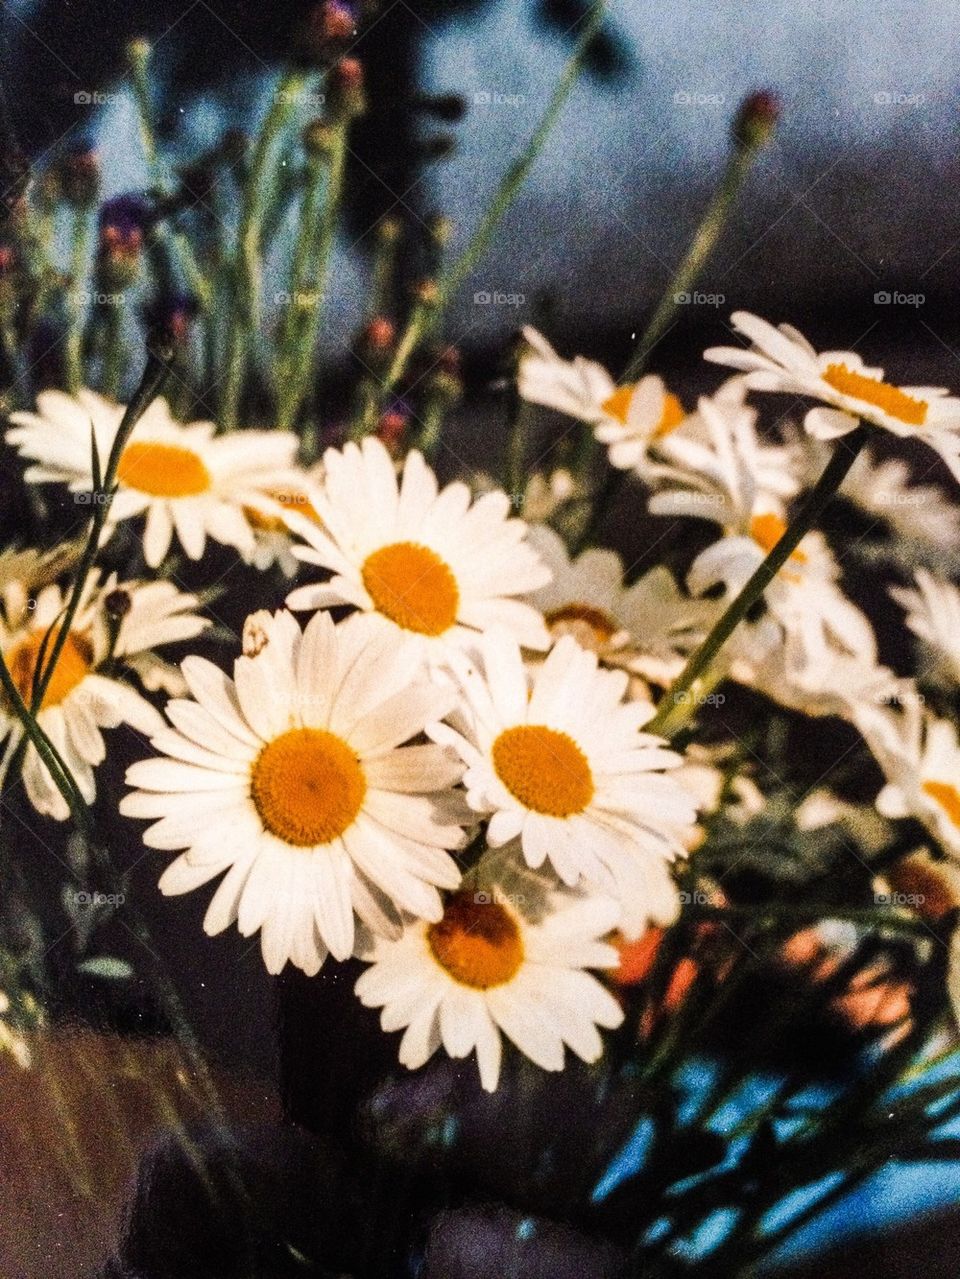 View of daisy flowers